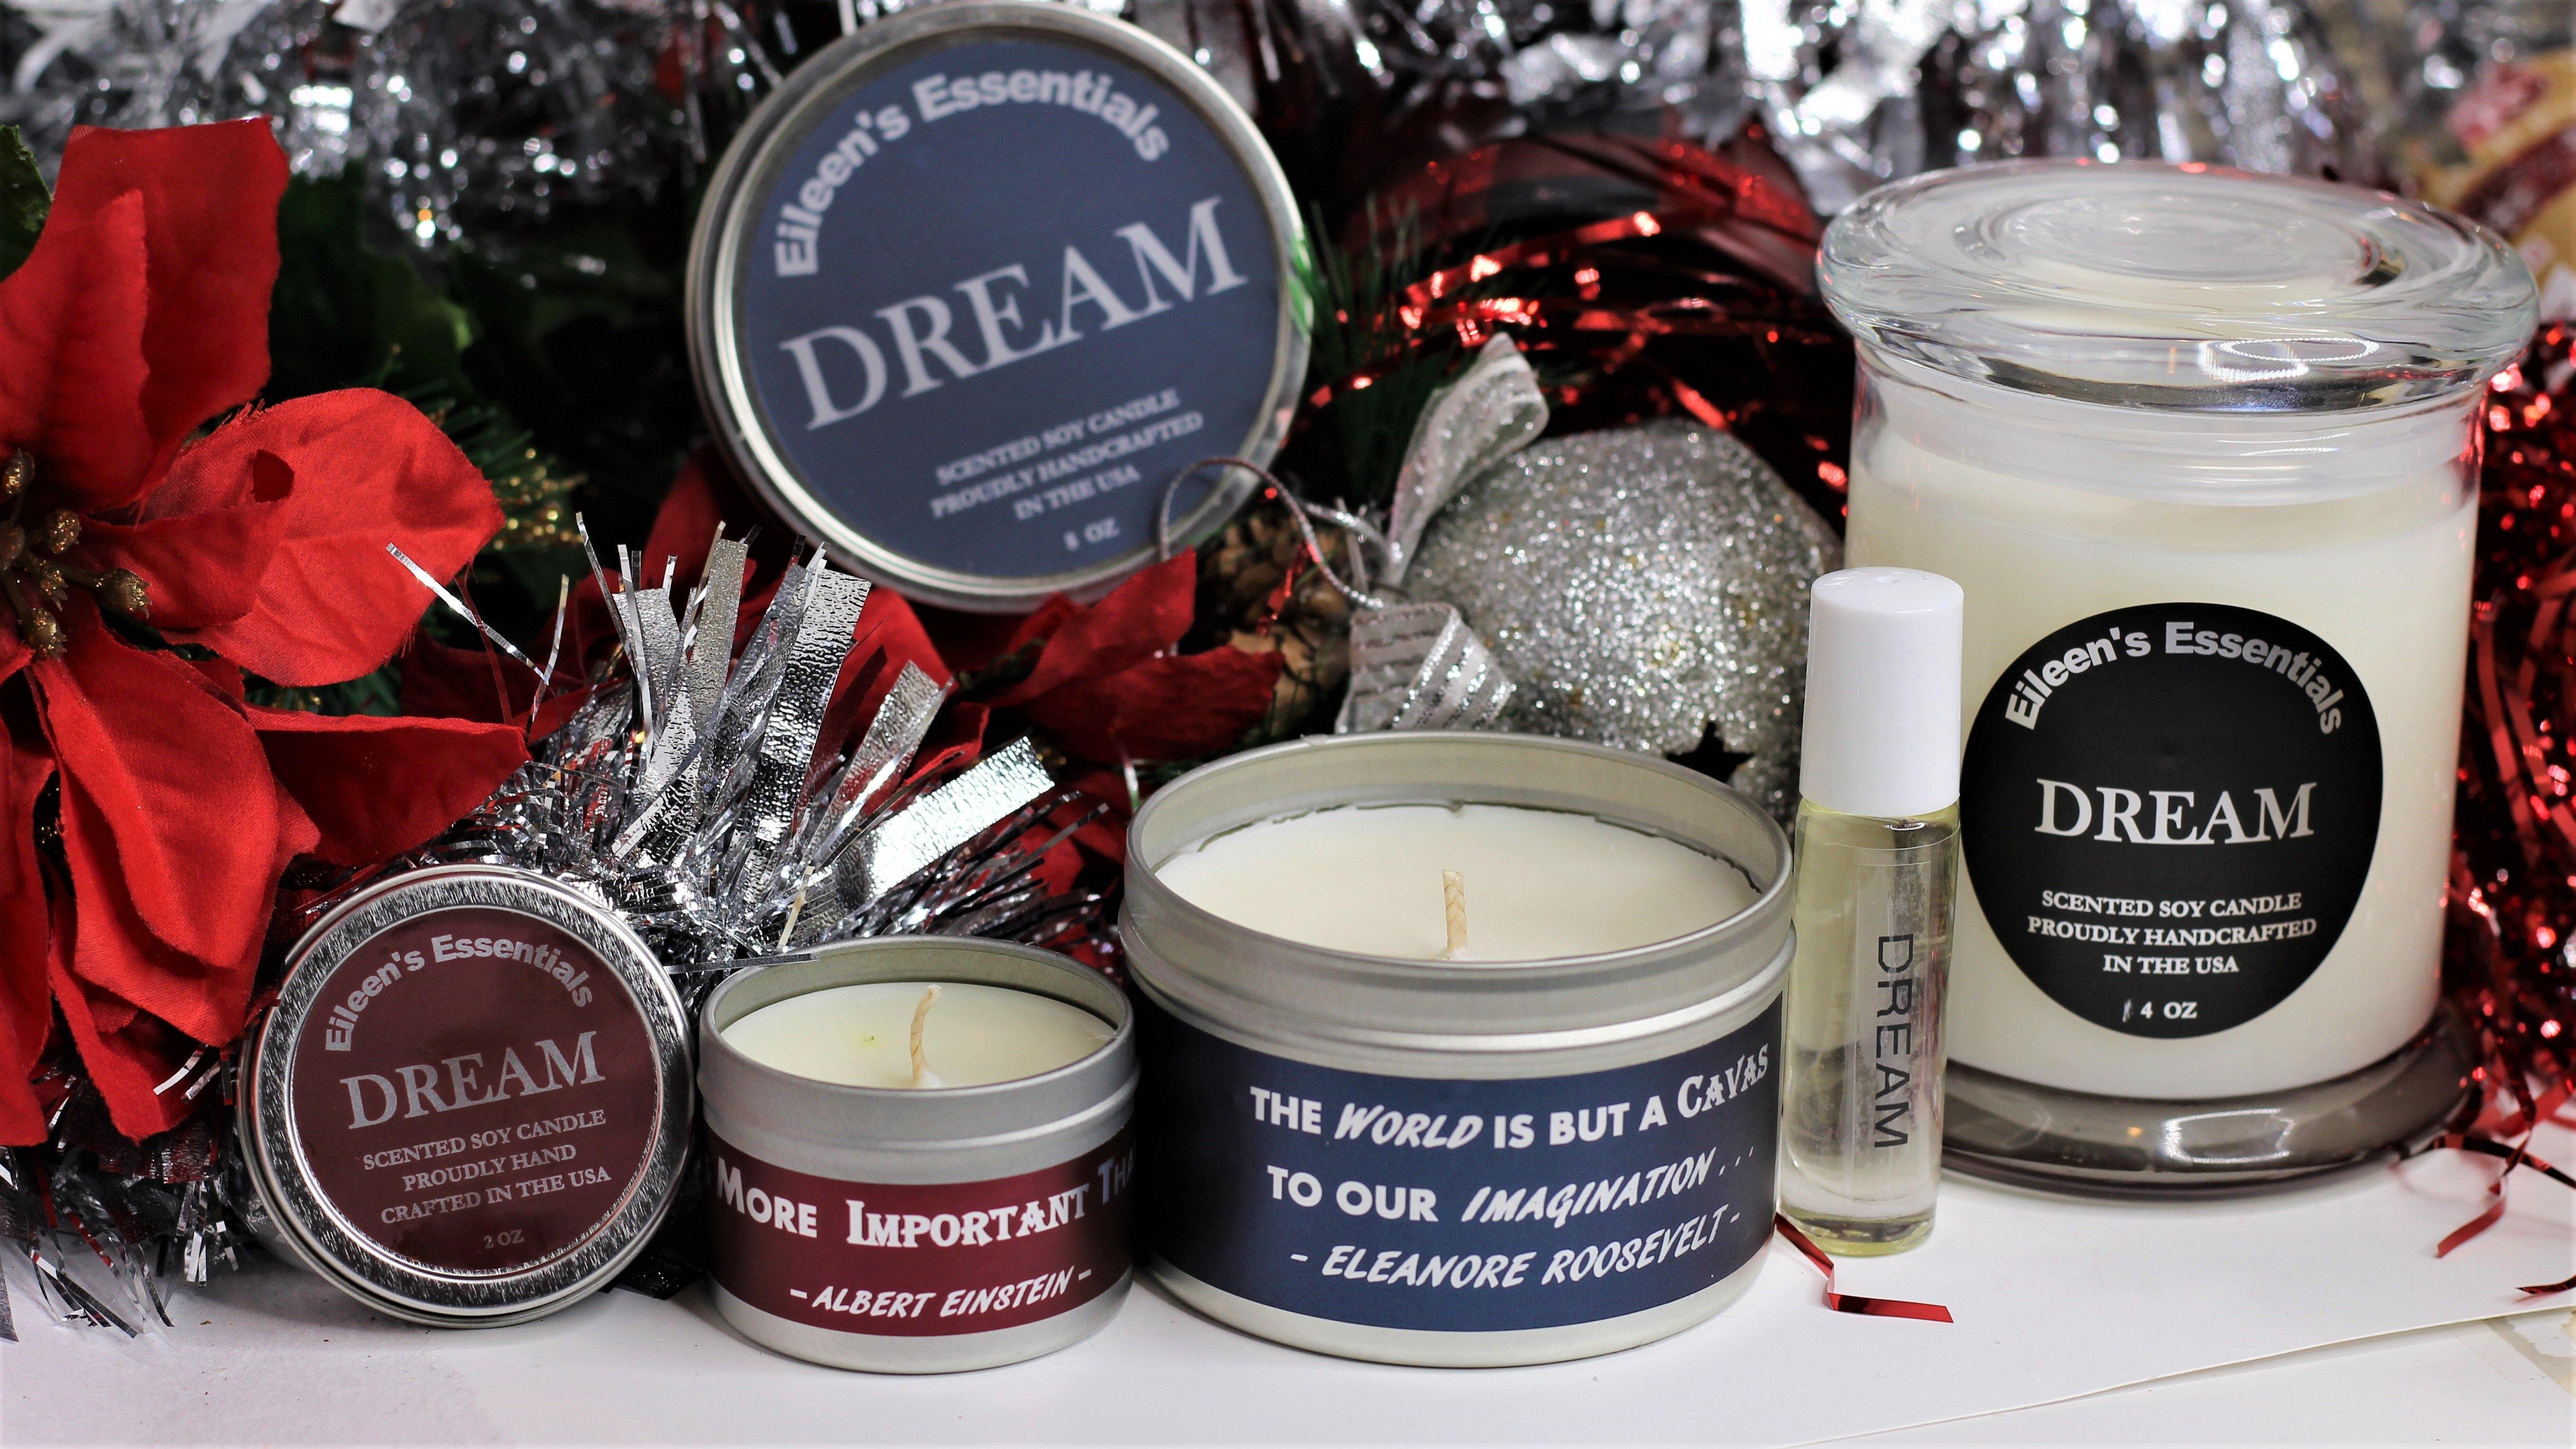 Holiday Deal; "DREAM" or "HAPPY" Inspirational Three Candle Set + FREE Affirmation Roll-On - Eileen's Essentials